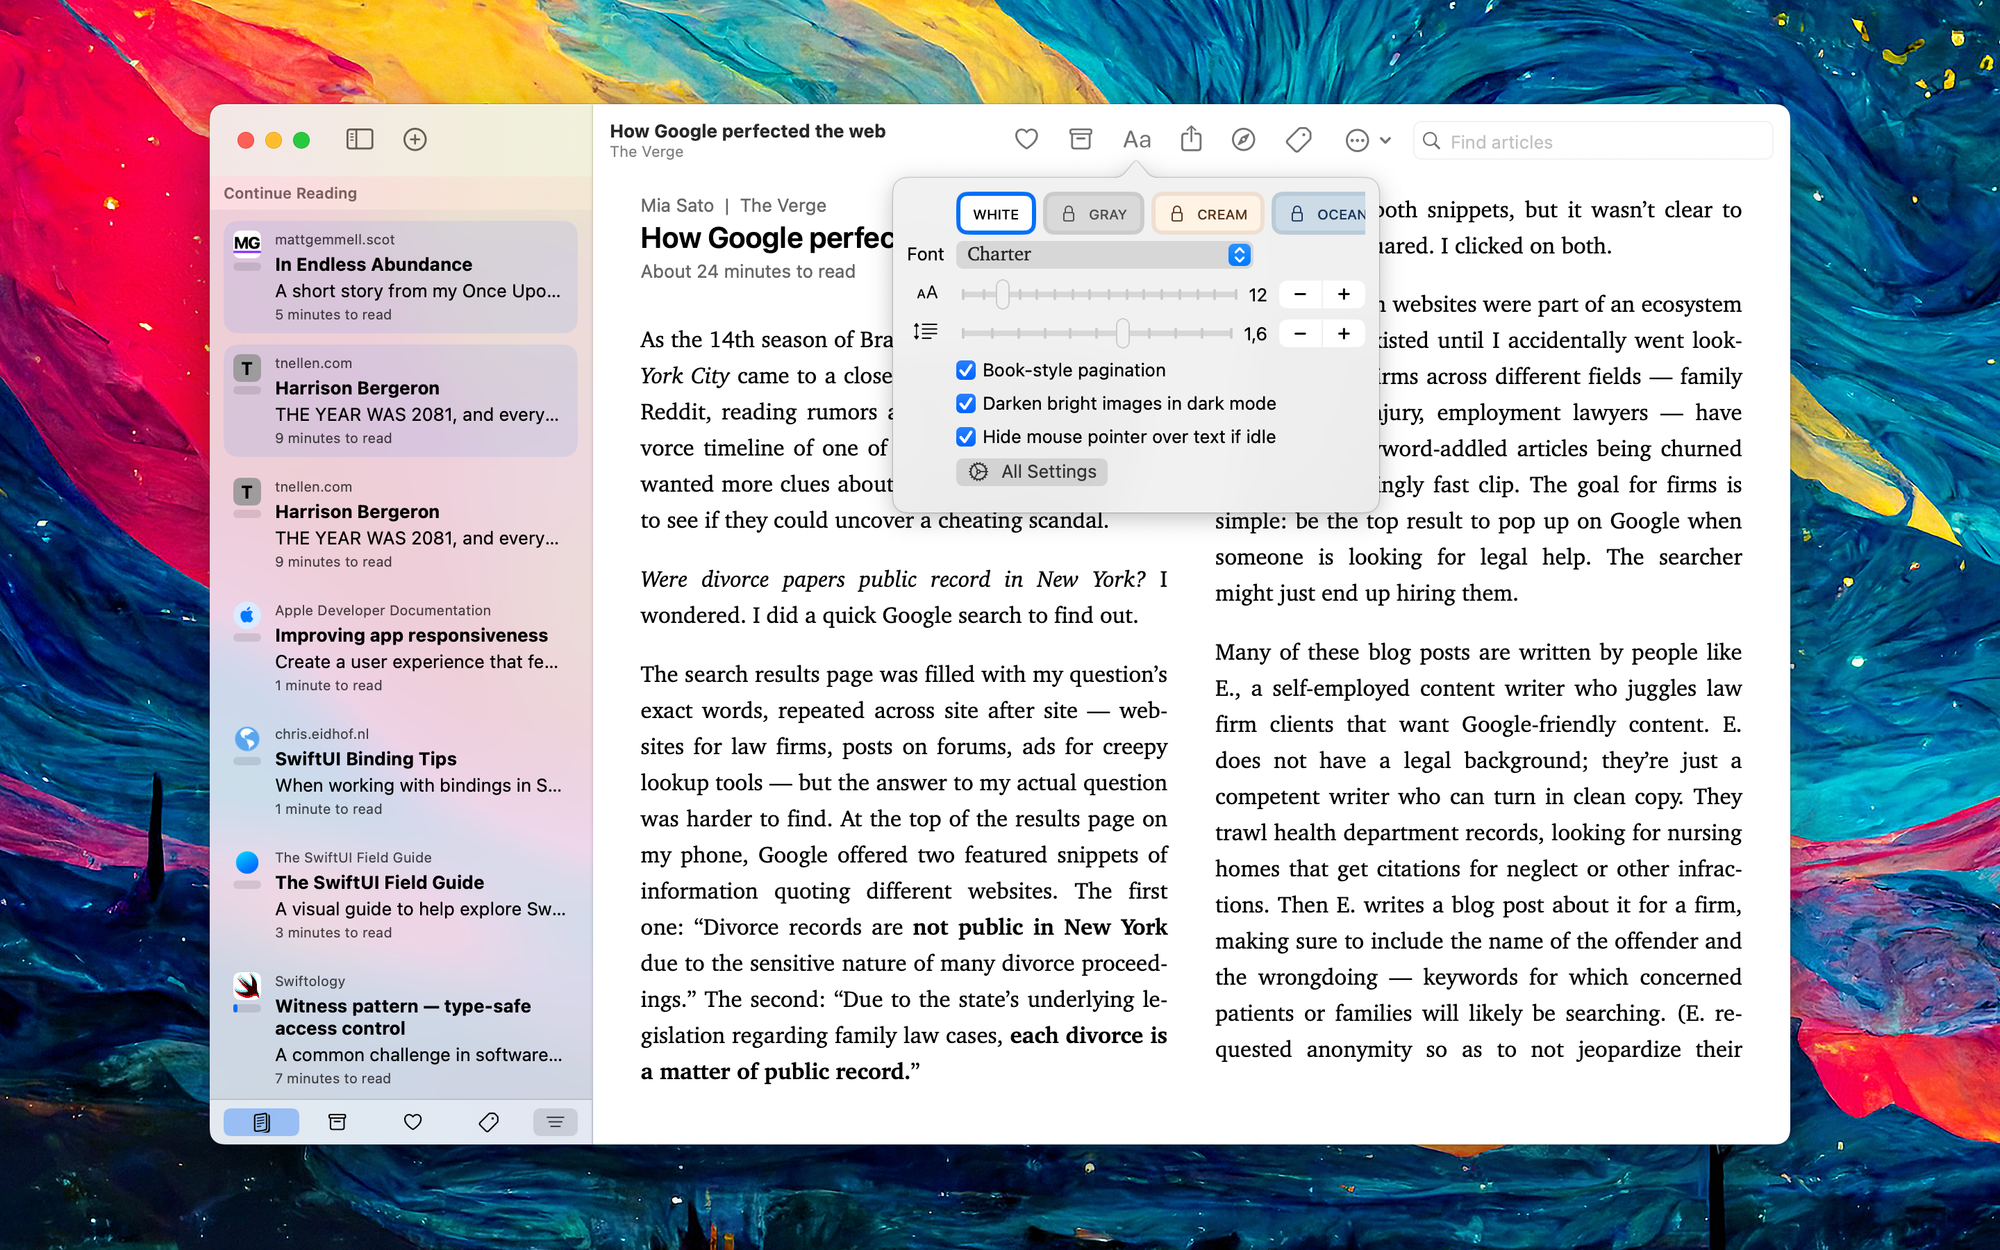 Read articles like books – with Flyleaf